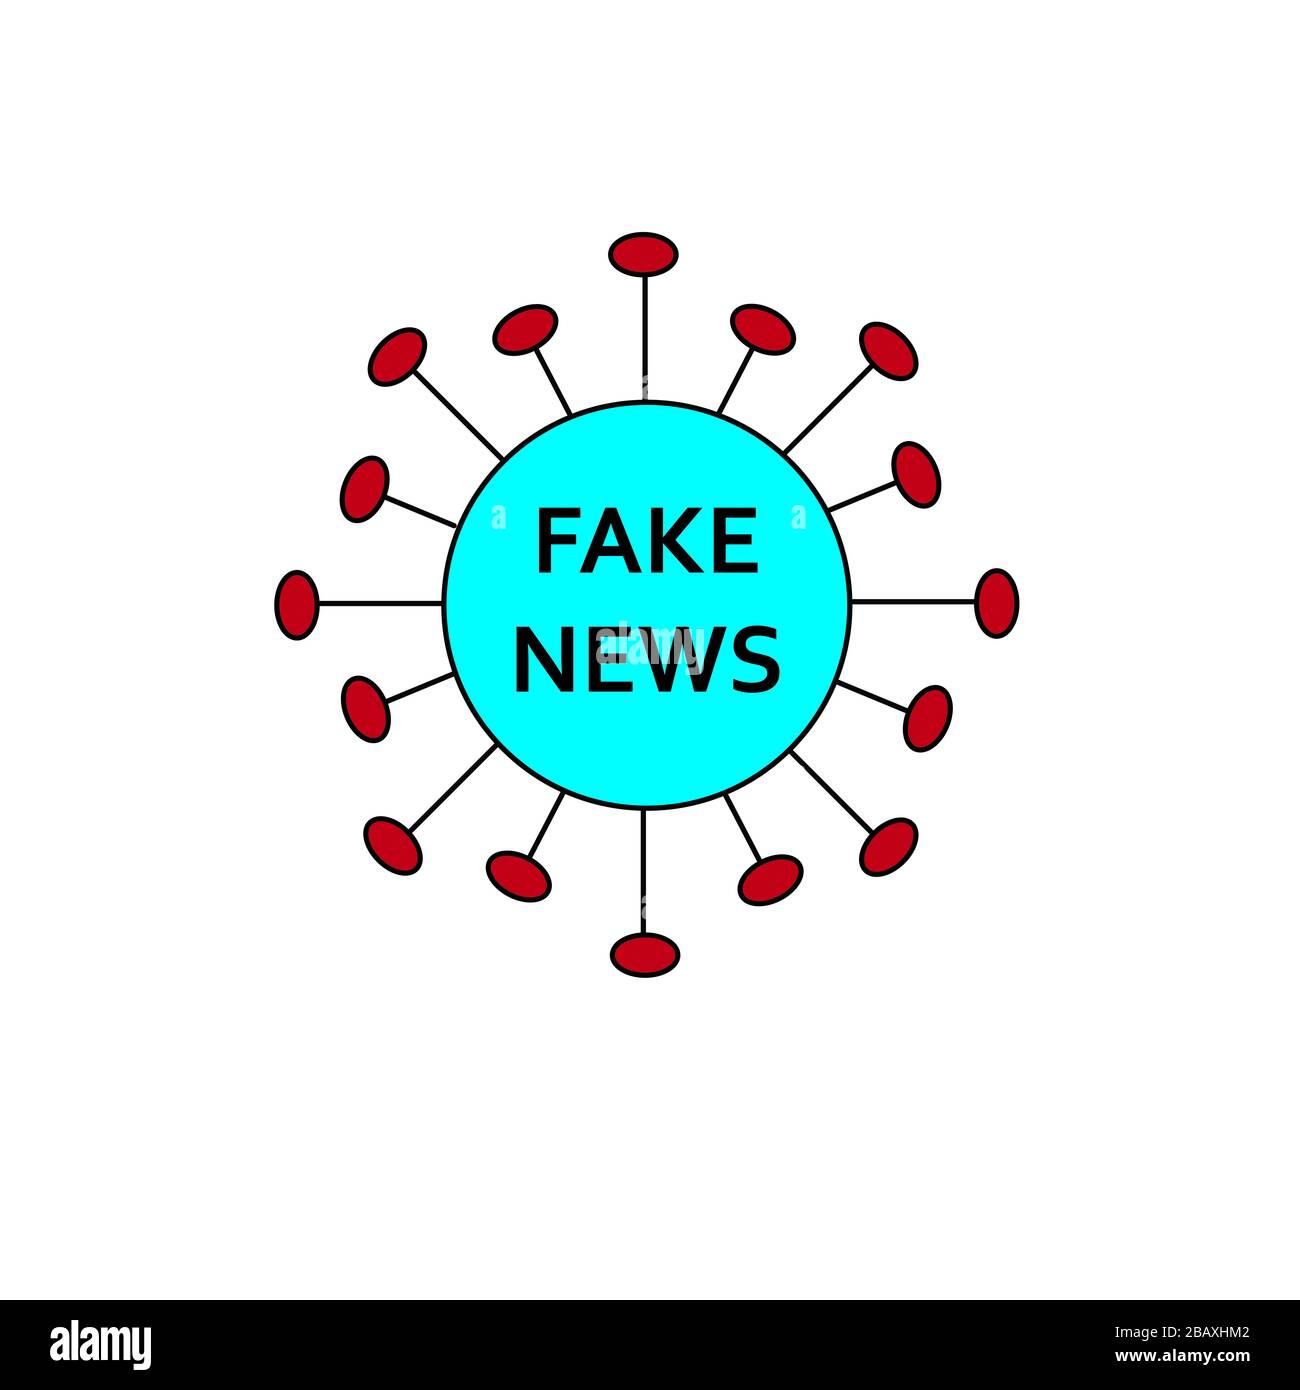 Covid19 coronavirus shape and word FAKE NEWS on top of it. Concept for fake news, reports, statistics, fake information during global pandemic and qua Stock Photo